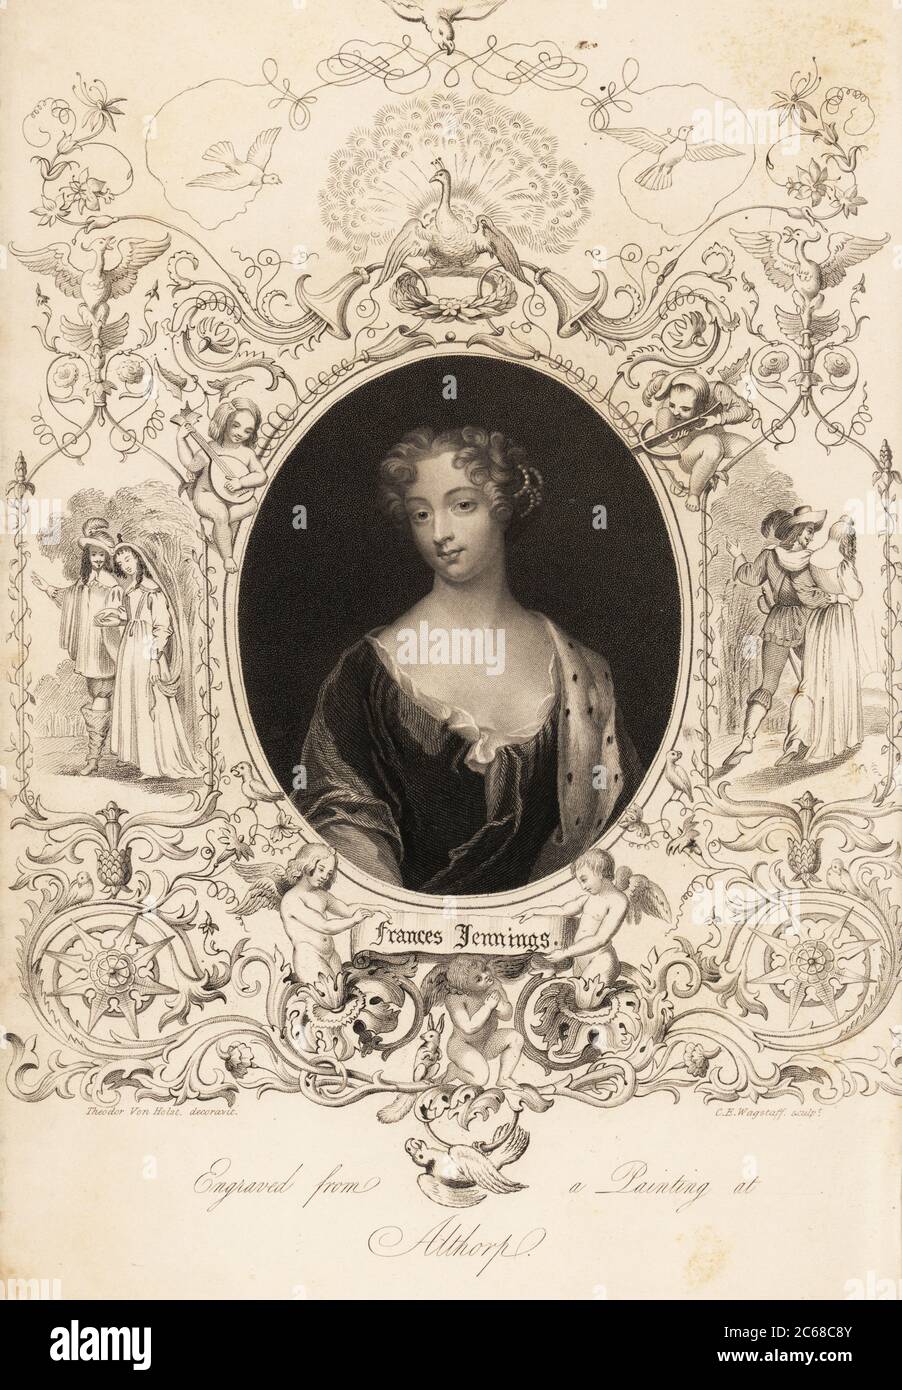 Frances Jennings, Countess of Tyrconnell, maid of honour to the Duchess of York, married to George Hamilton and later Richard Talbot, Earl of Tyrconell, famous beauty at court, 1649-1731. Steel engraving by Charles Edward Wagstaff, with ornate decoration by Theodor von Holst, after an original portrait in the possession of Earl Spencer at Althorp from Mrs Anna Jameson’s Memoirs of the Beauties of the Court of King Charles the Second, Henry Coburn, London, 1838 Stock Photo